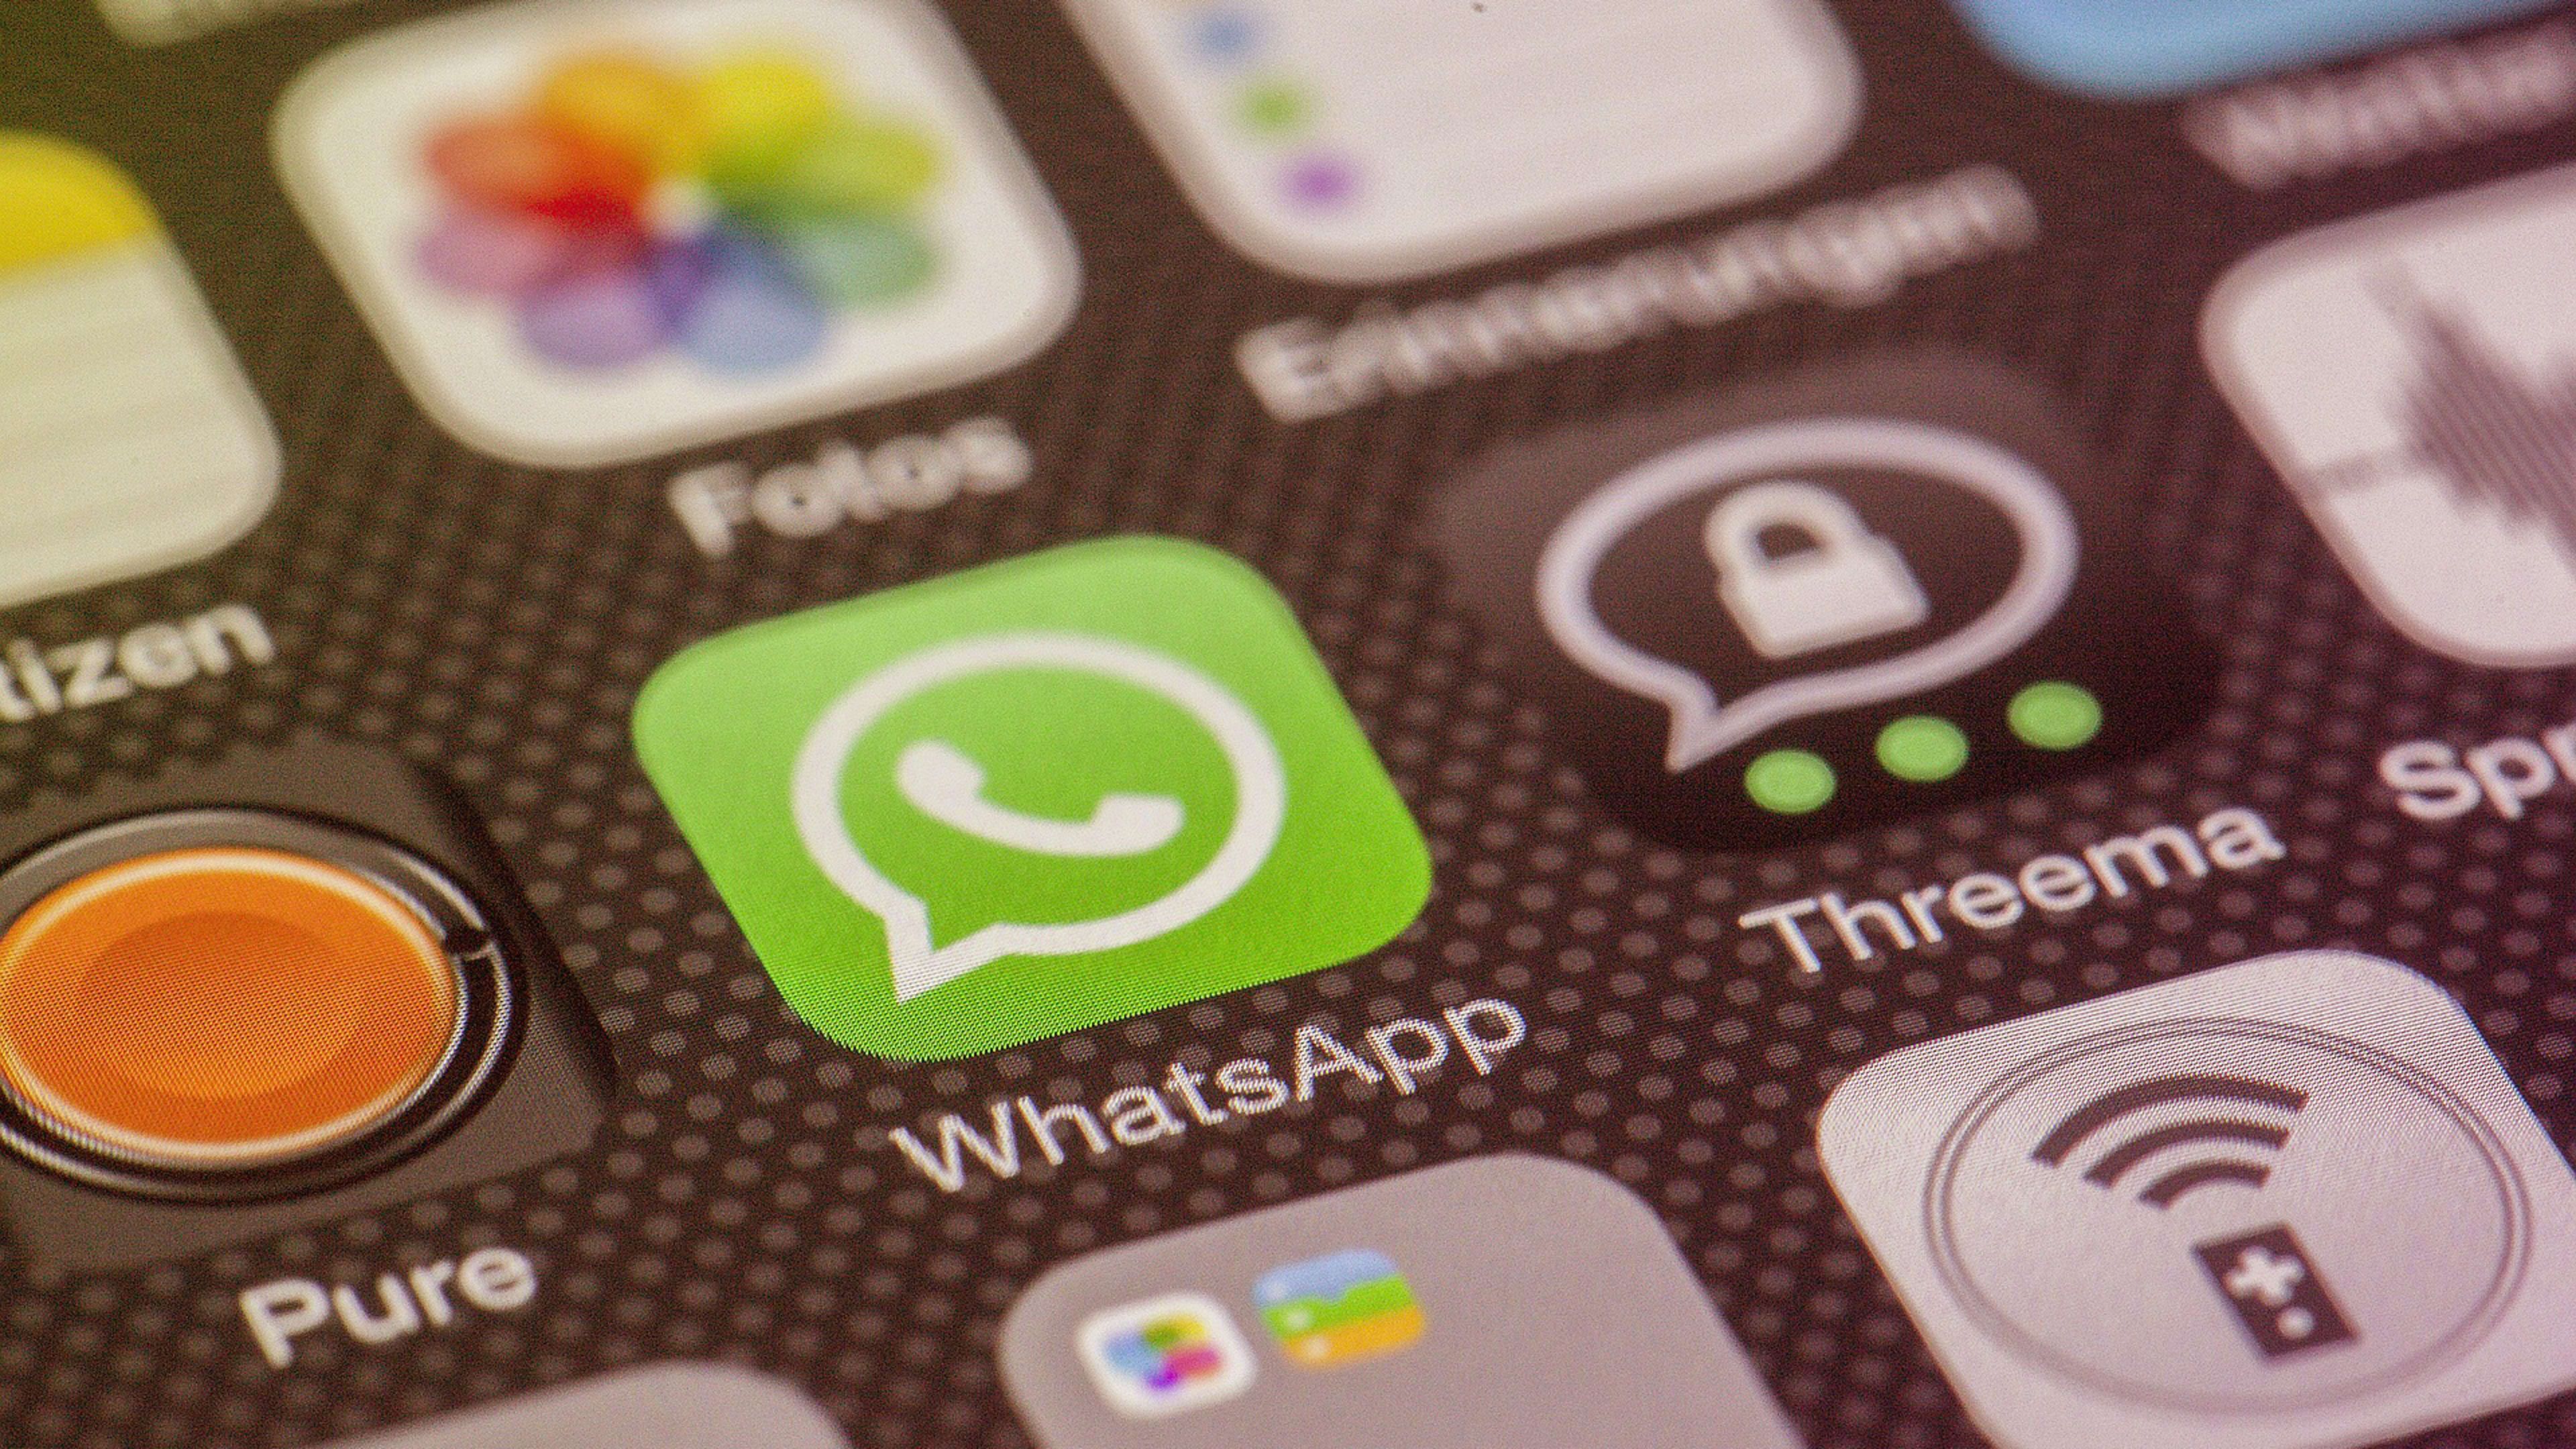 France will move gov officials off Telegram and WhatsApp over spying fears